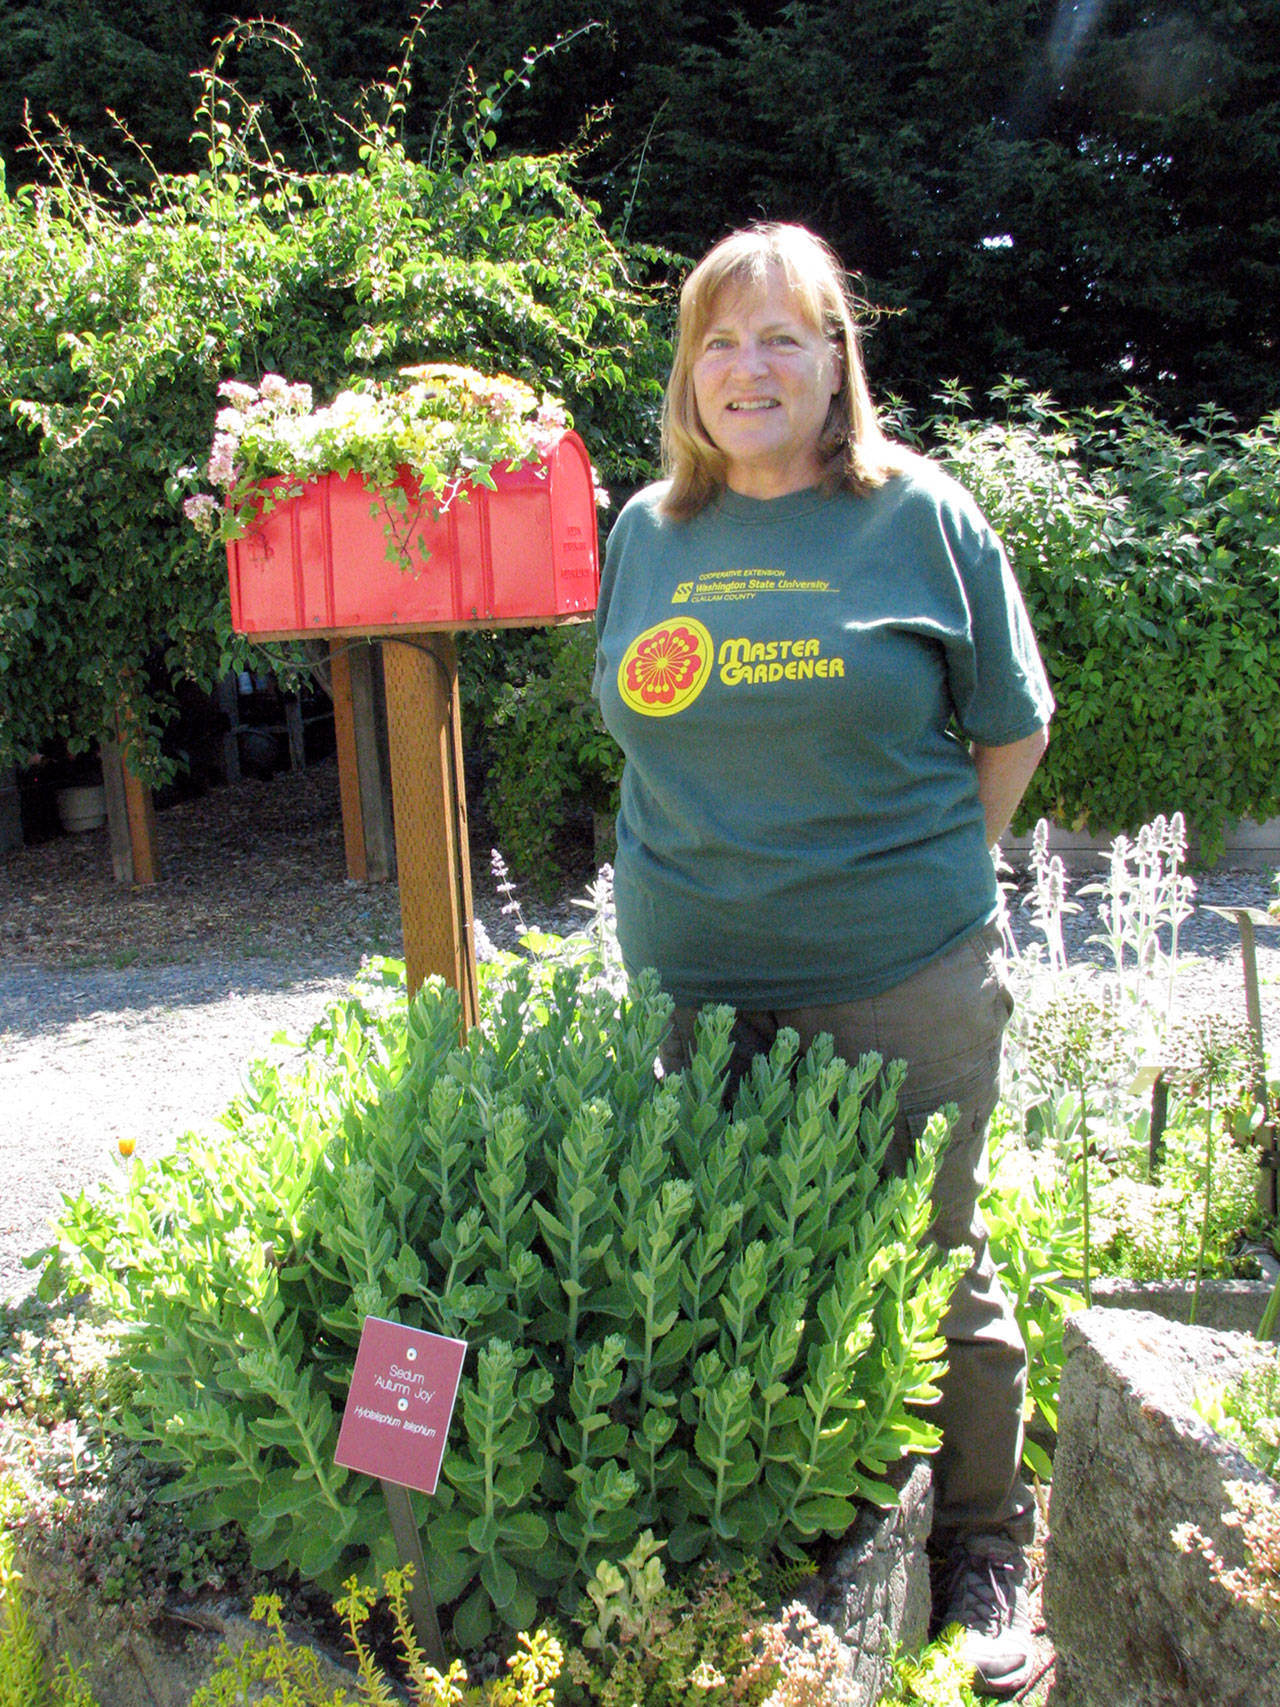 Master Gardener Susan Kalmar will present “Hardy Succulents” at noon Thursday in the county commissioners meeting room of the Clallam County Courthouse, 223 E. Fourth St.